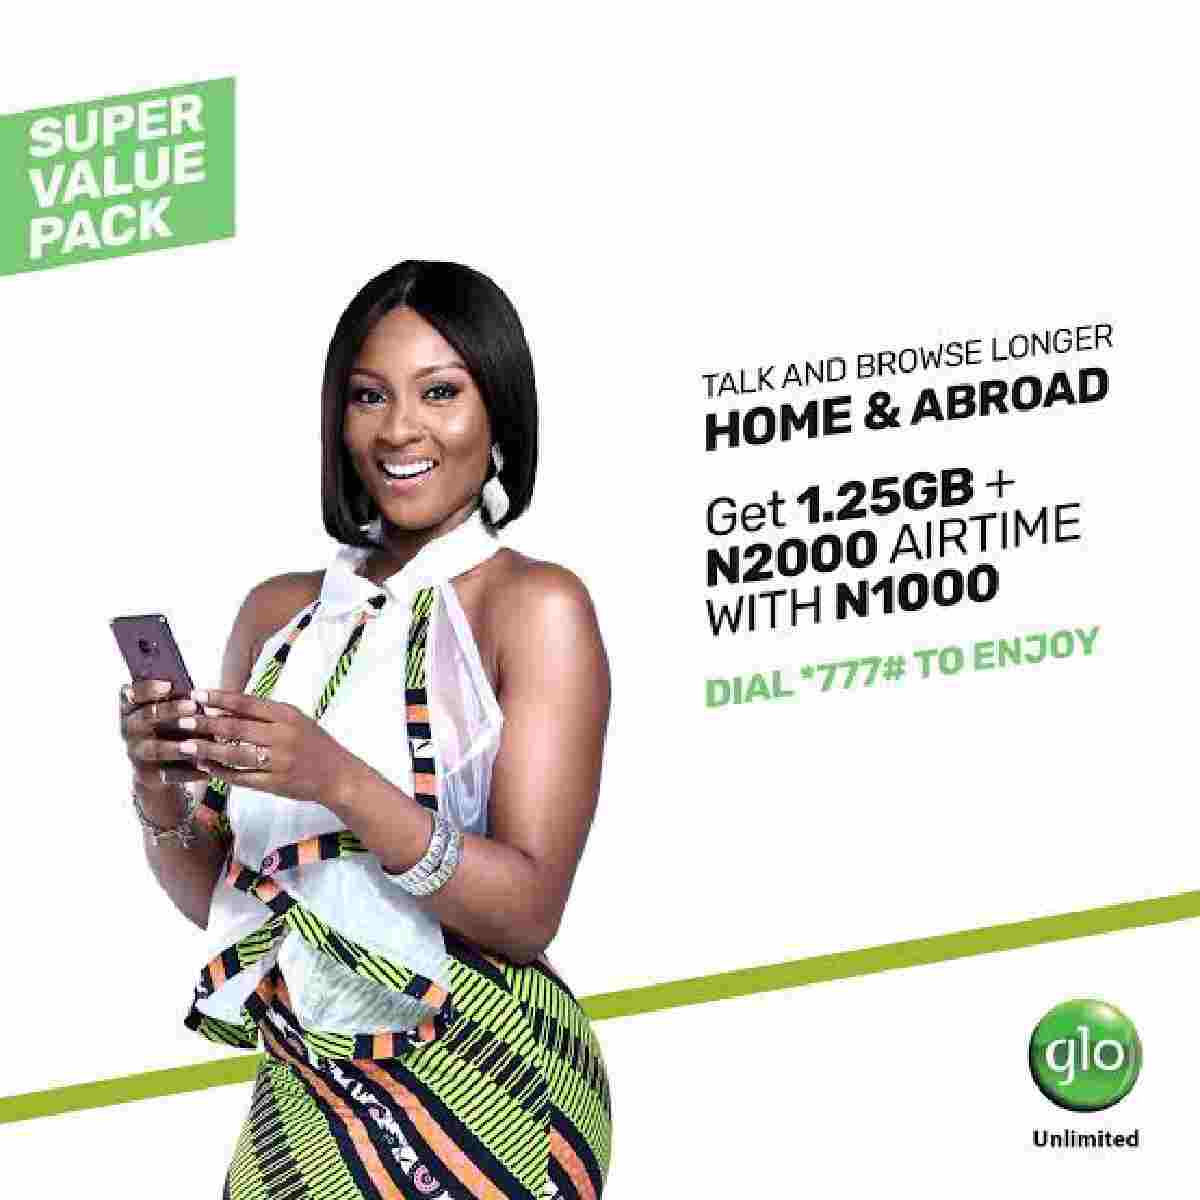 glo-super-value-pack-benefits-call-charges-and-how-to-subscribe-gistfocus